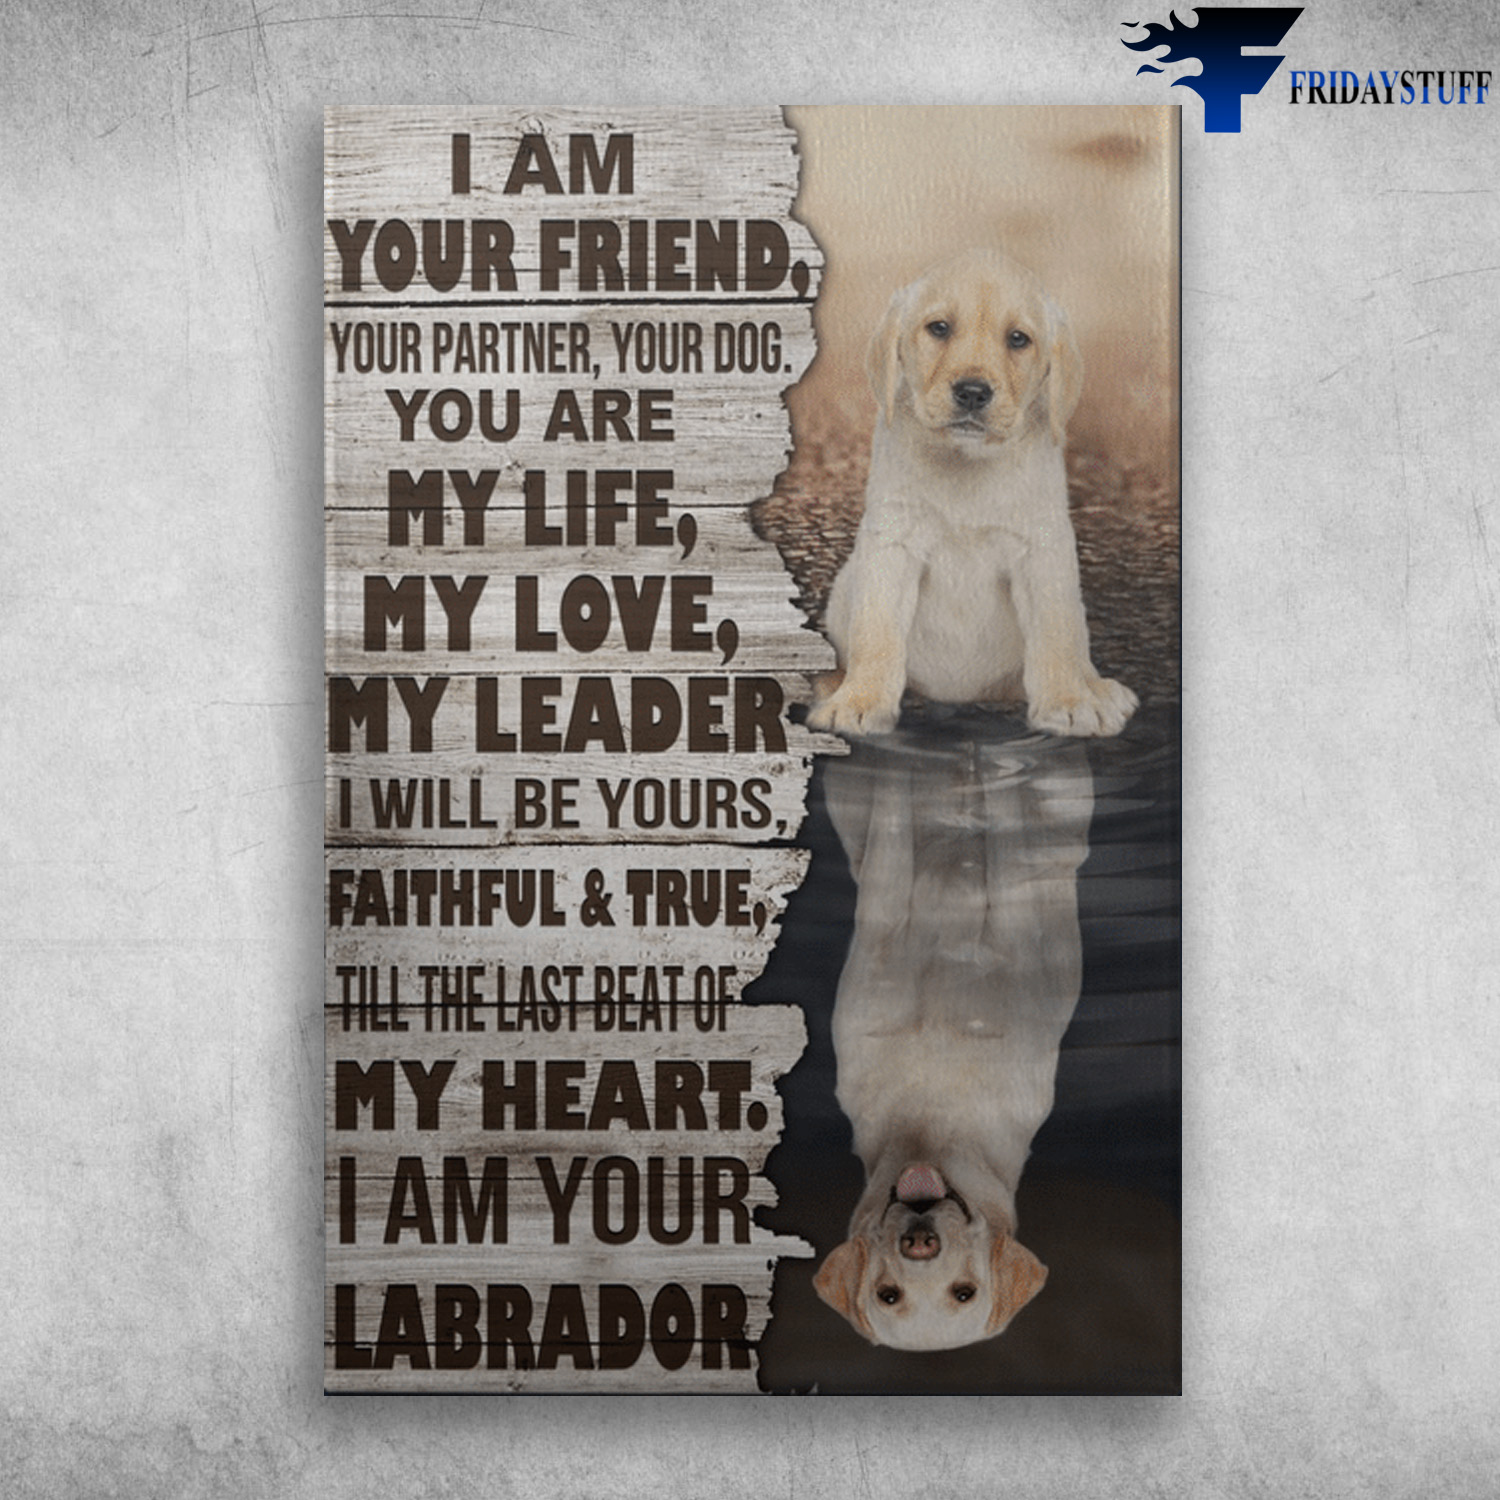 Yellow Labrador - I Am Your Friend, Your Partner, Your Dog, You Are My Life, My Love, My Leader, I Will Be Yours Faithful And True, Till The Last Beat Of My Heart, I Am Your Labrador